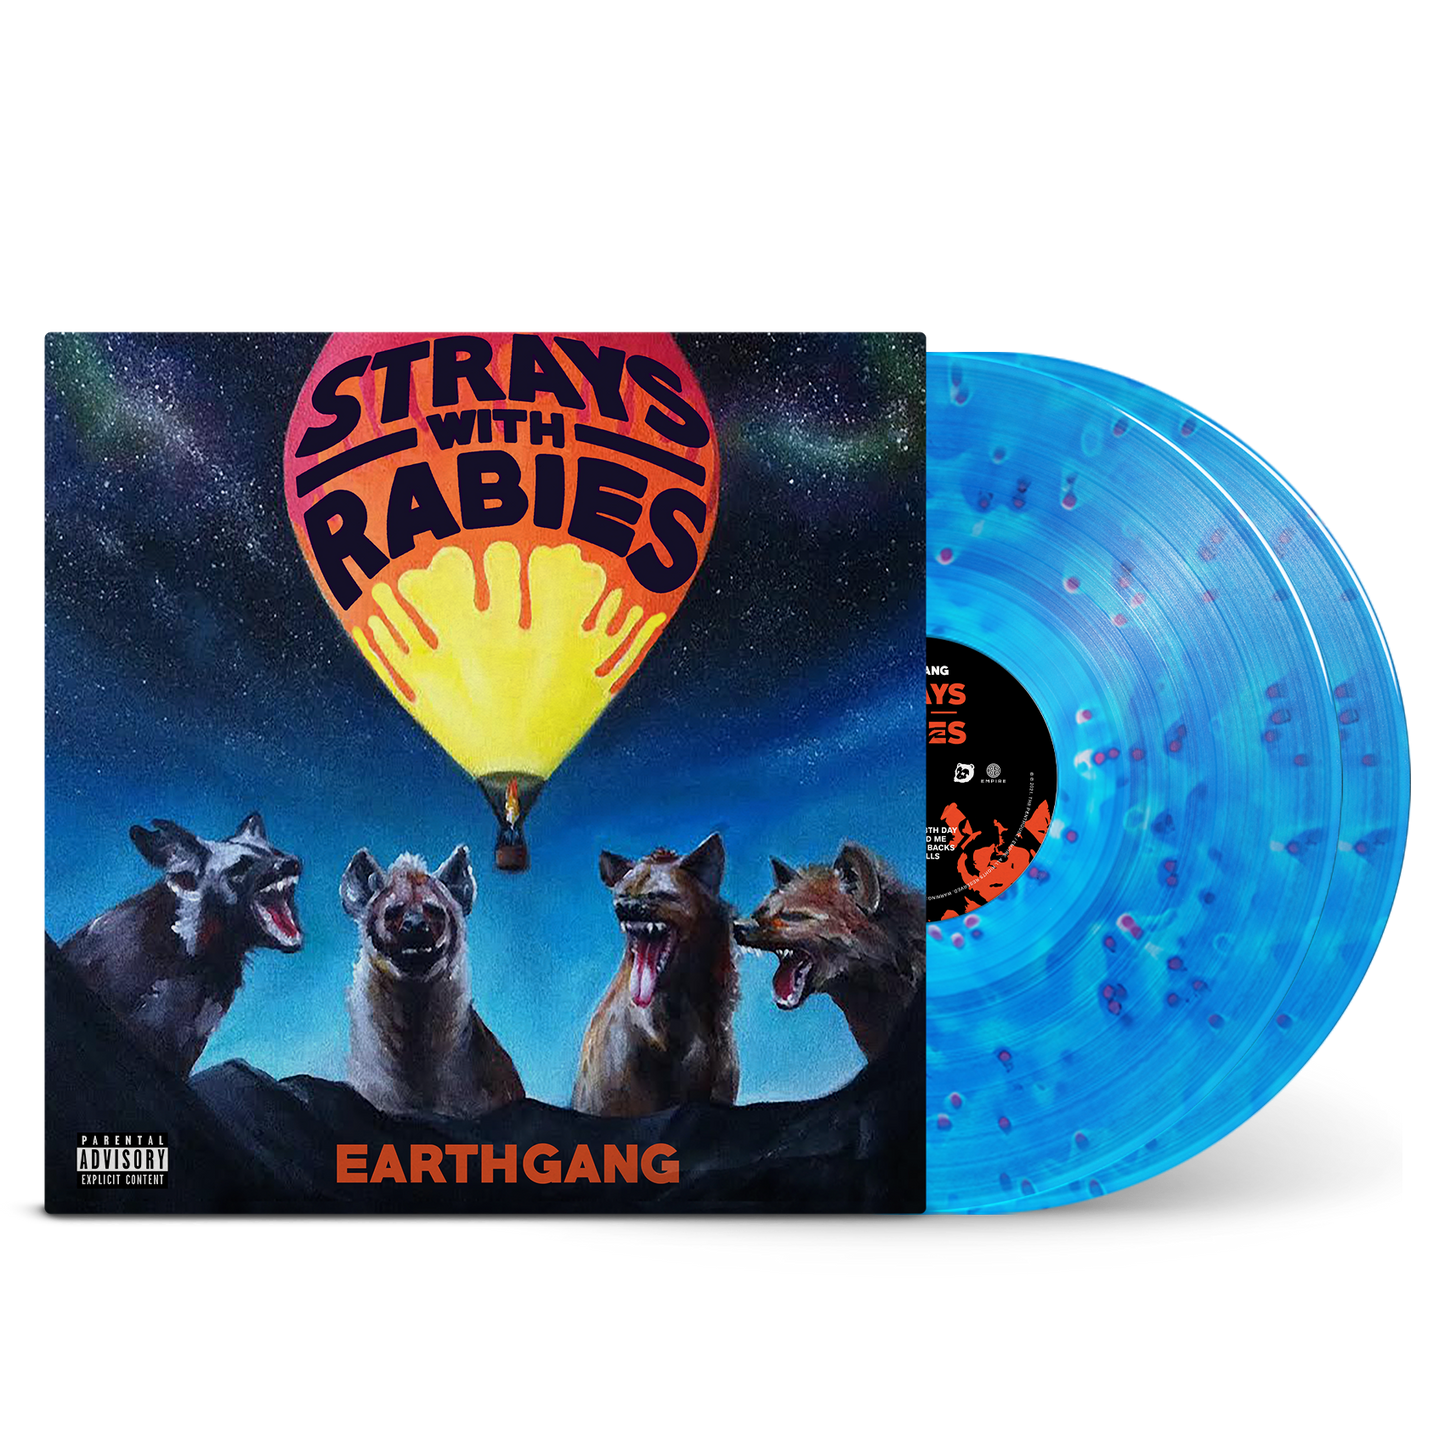 EARTHGANG - Strays With Rabies Vinyl